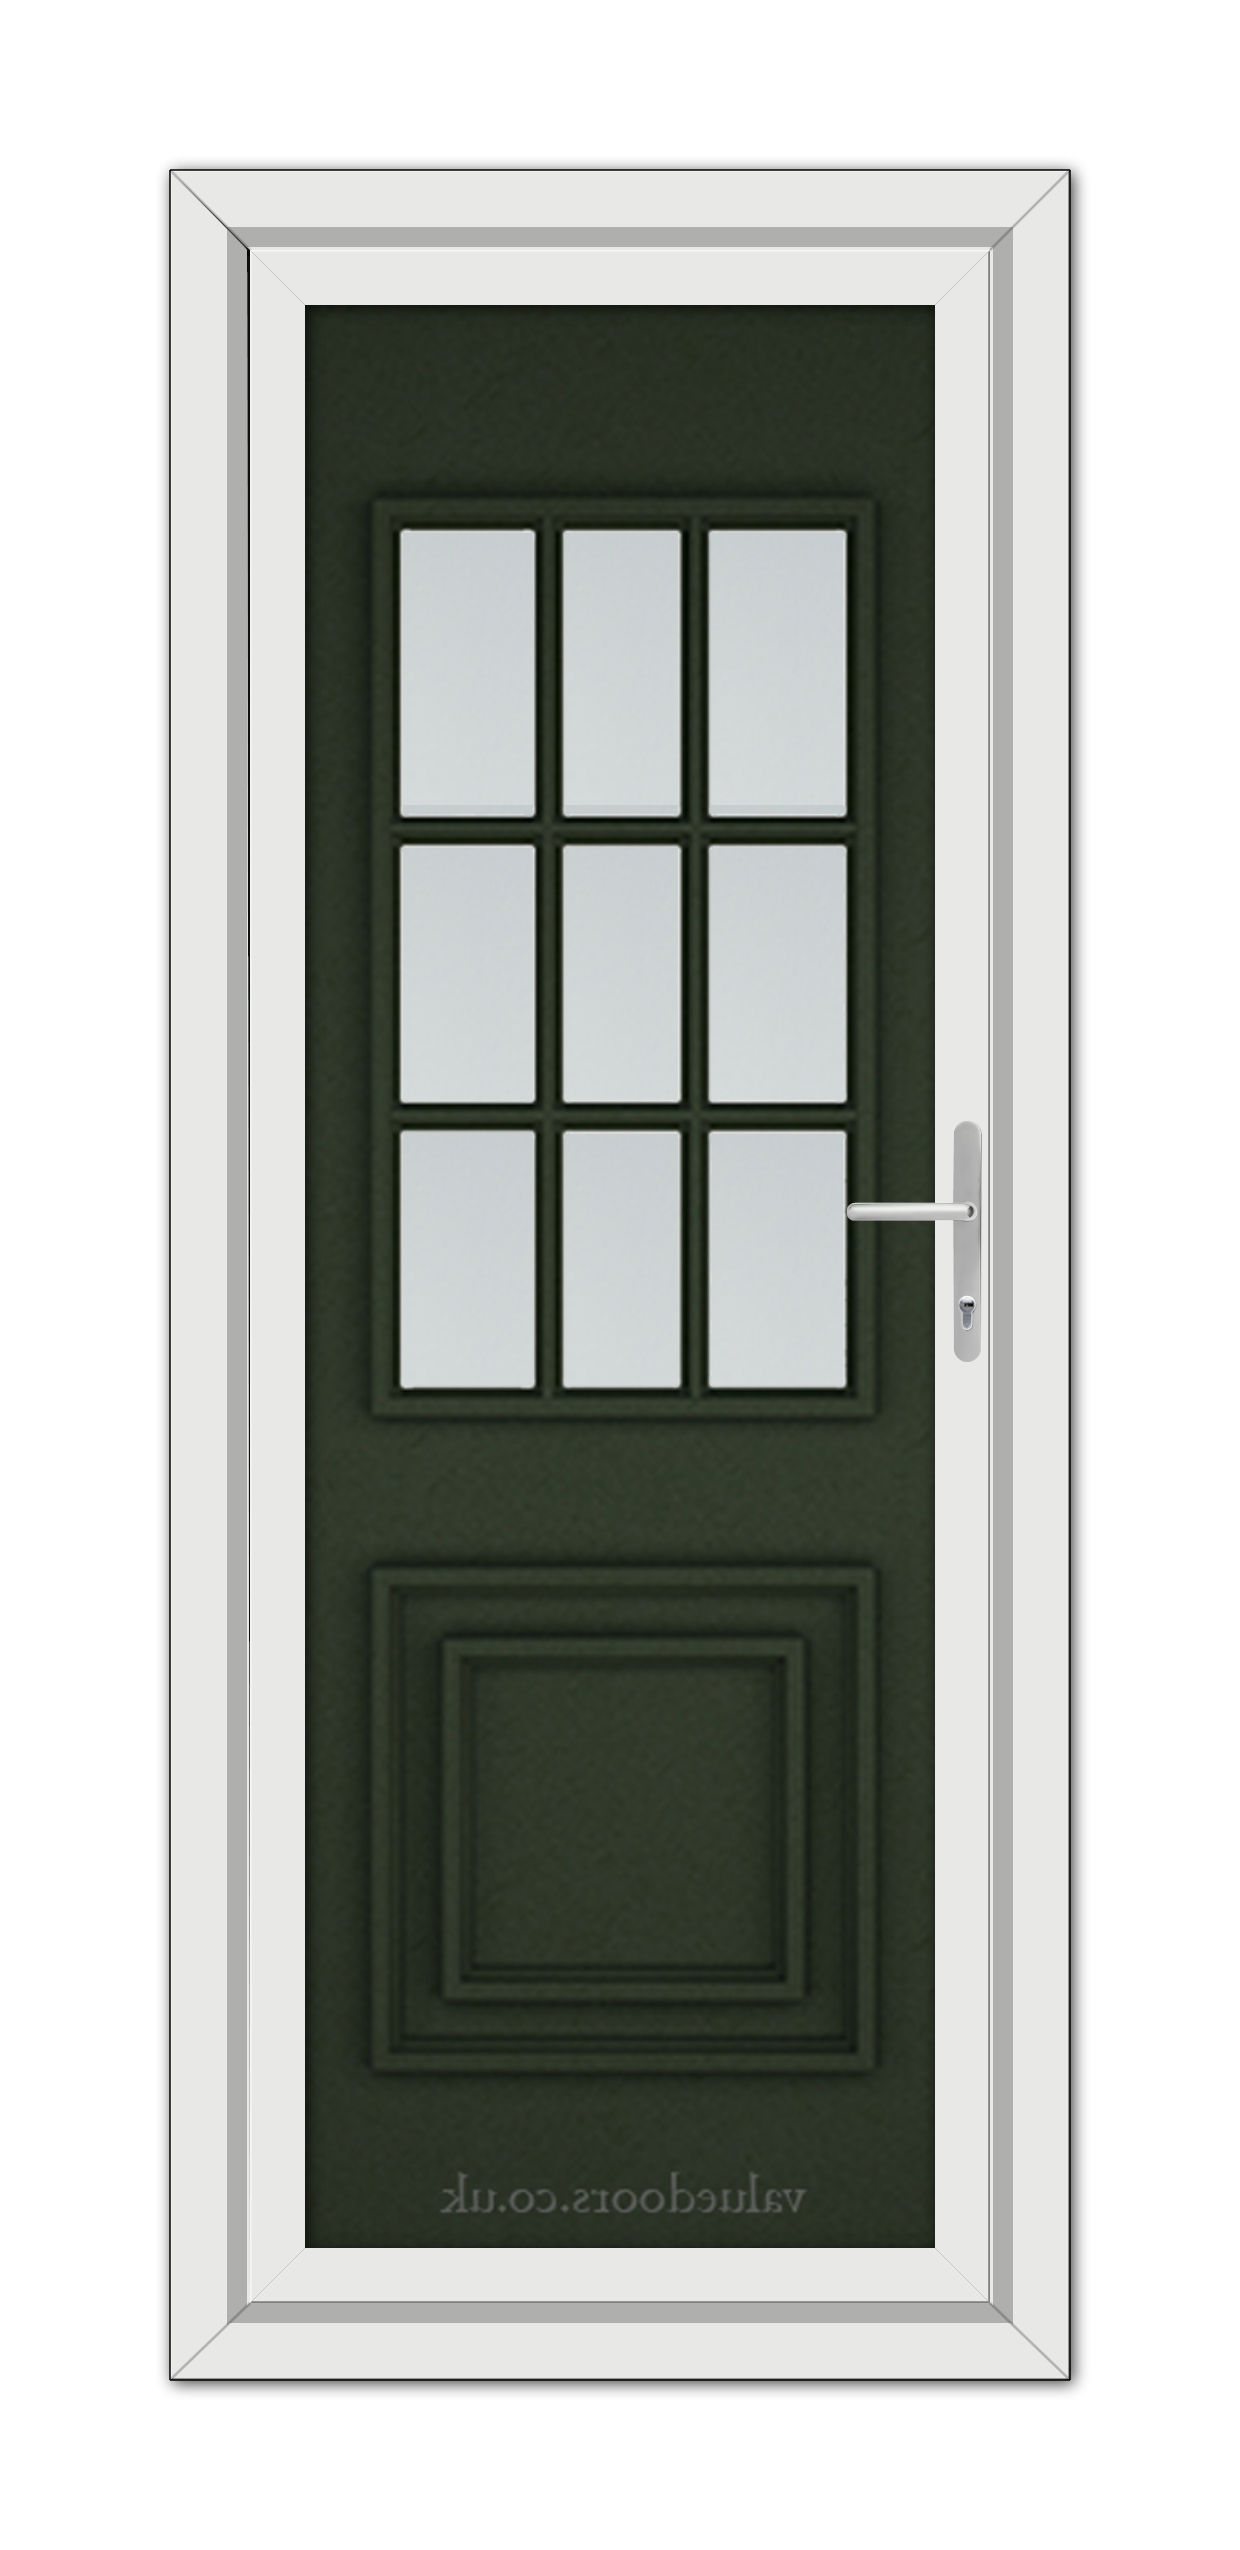 A vertical image of a Green Cambridge One uPVC Door with nine small, square glass panes, a metal handle, and a white door frame.